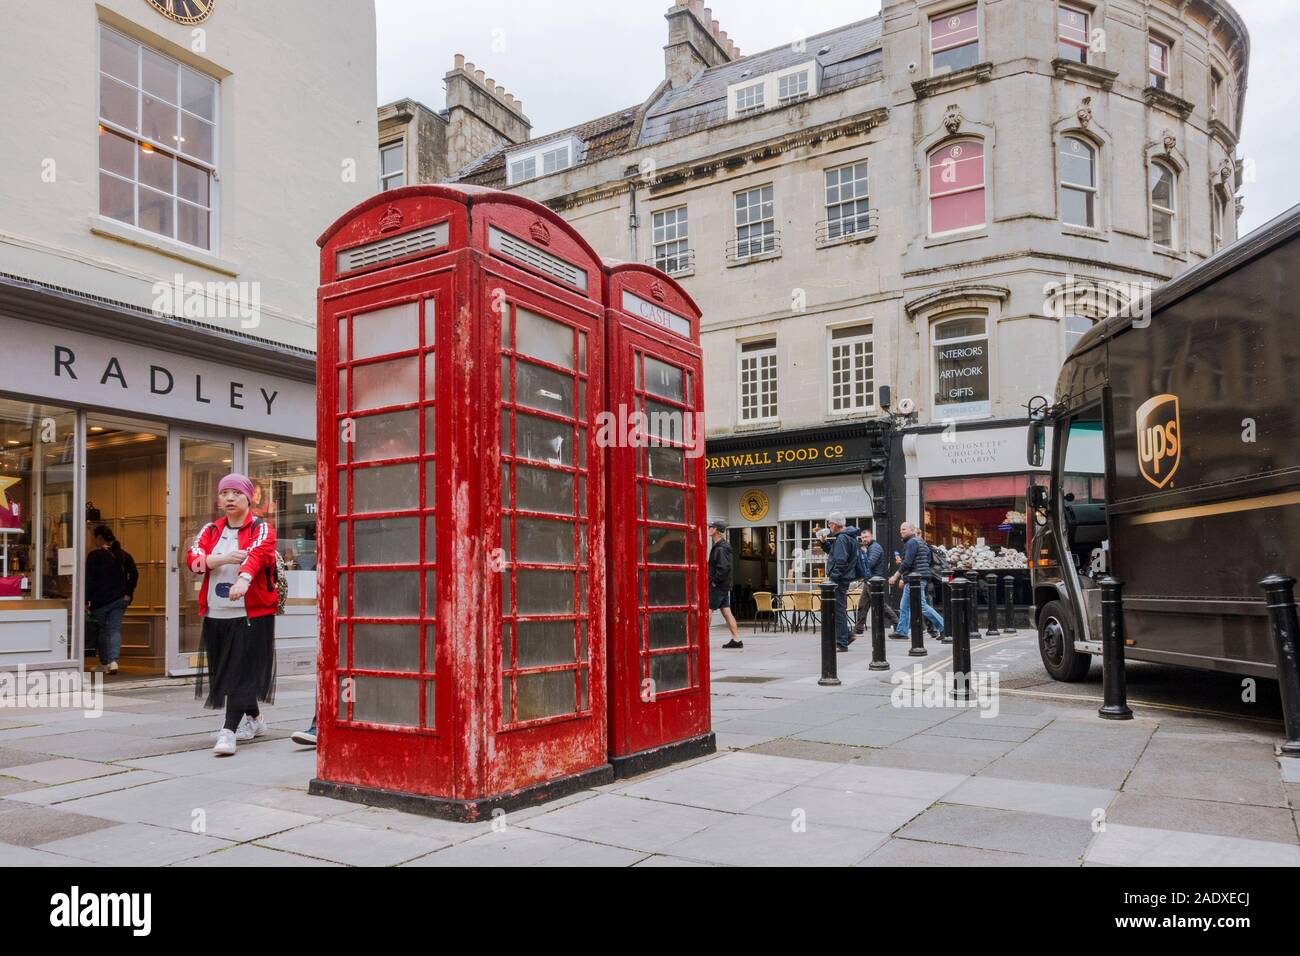 Traditional British red phone boxes, now used as ATM , Cash machines, financial transactions. Bath, Somerset, England, UK. Stock Photo